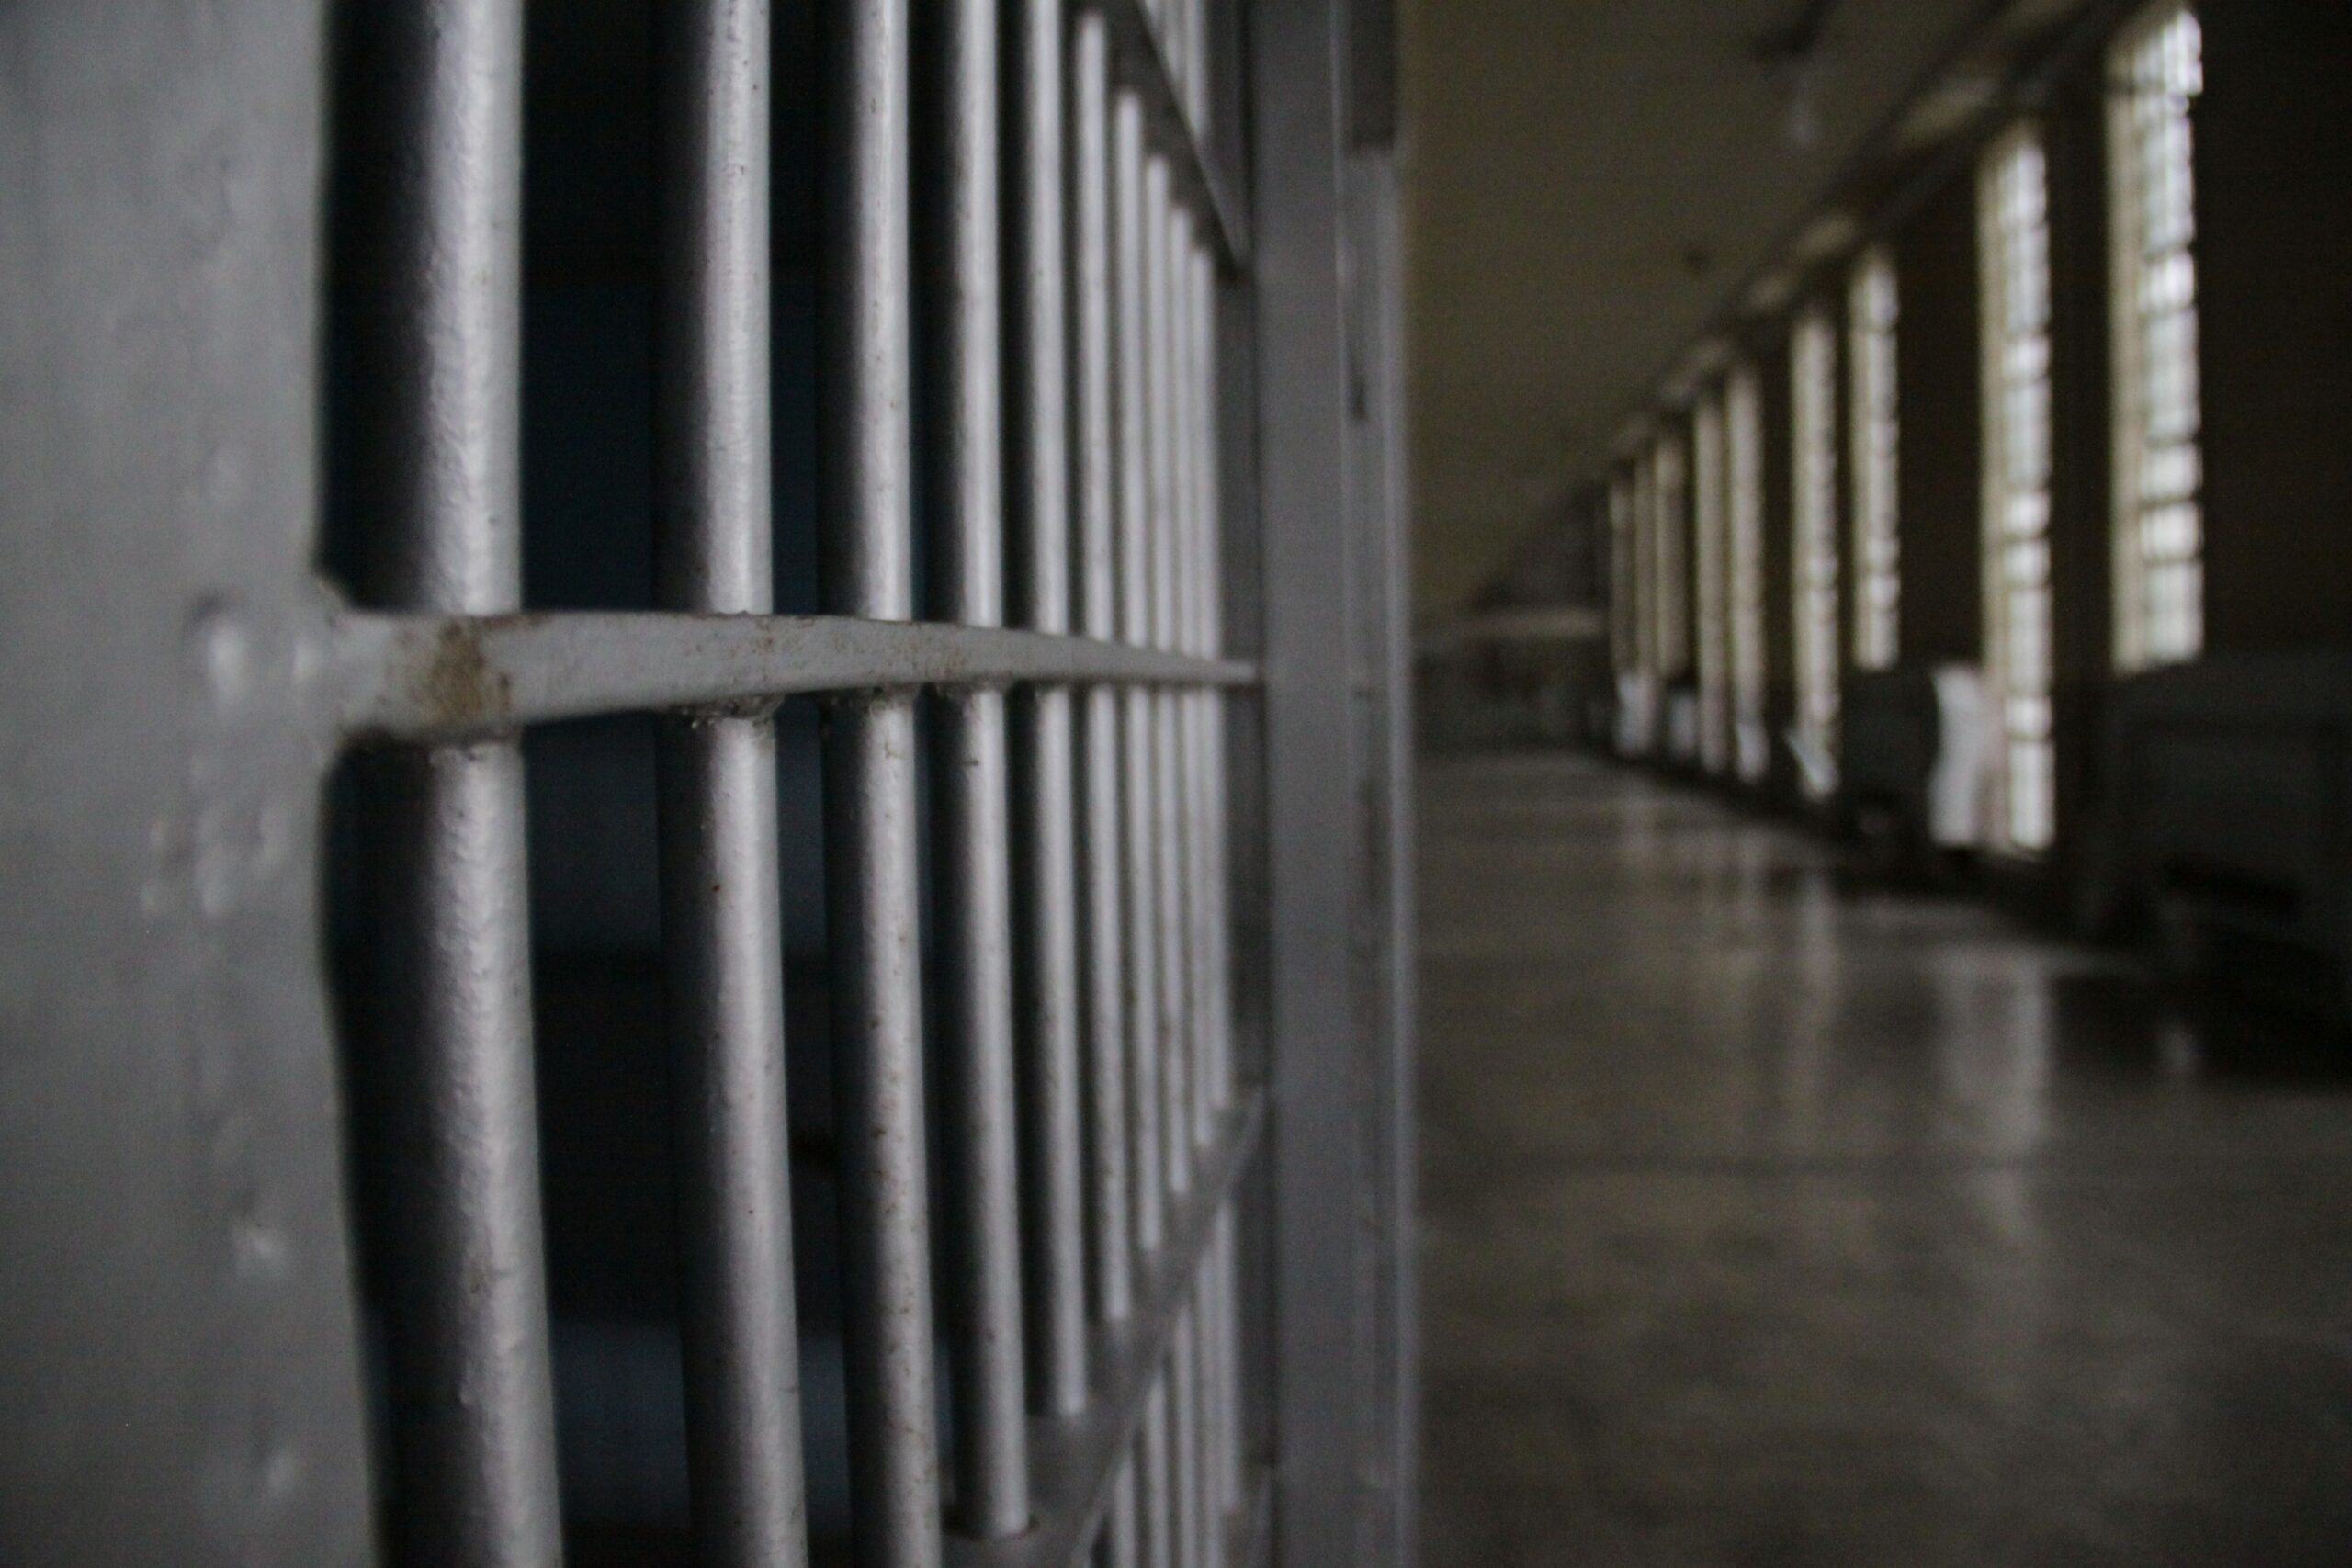 Wisconsin's Corrections Spending Higher Than Average, Report Finds - WPR